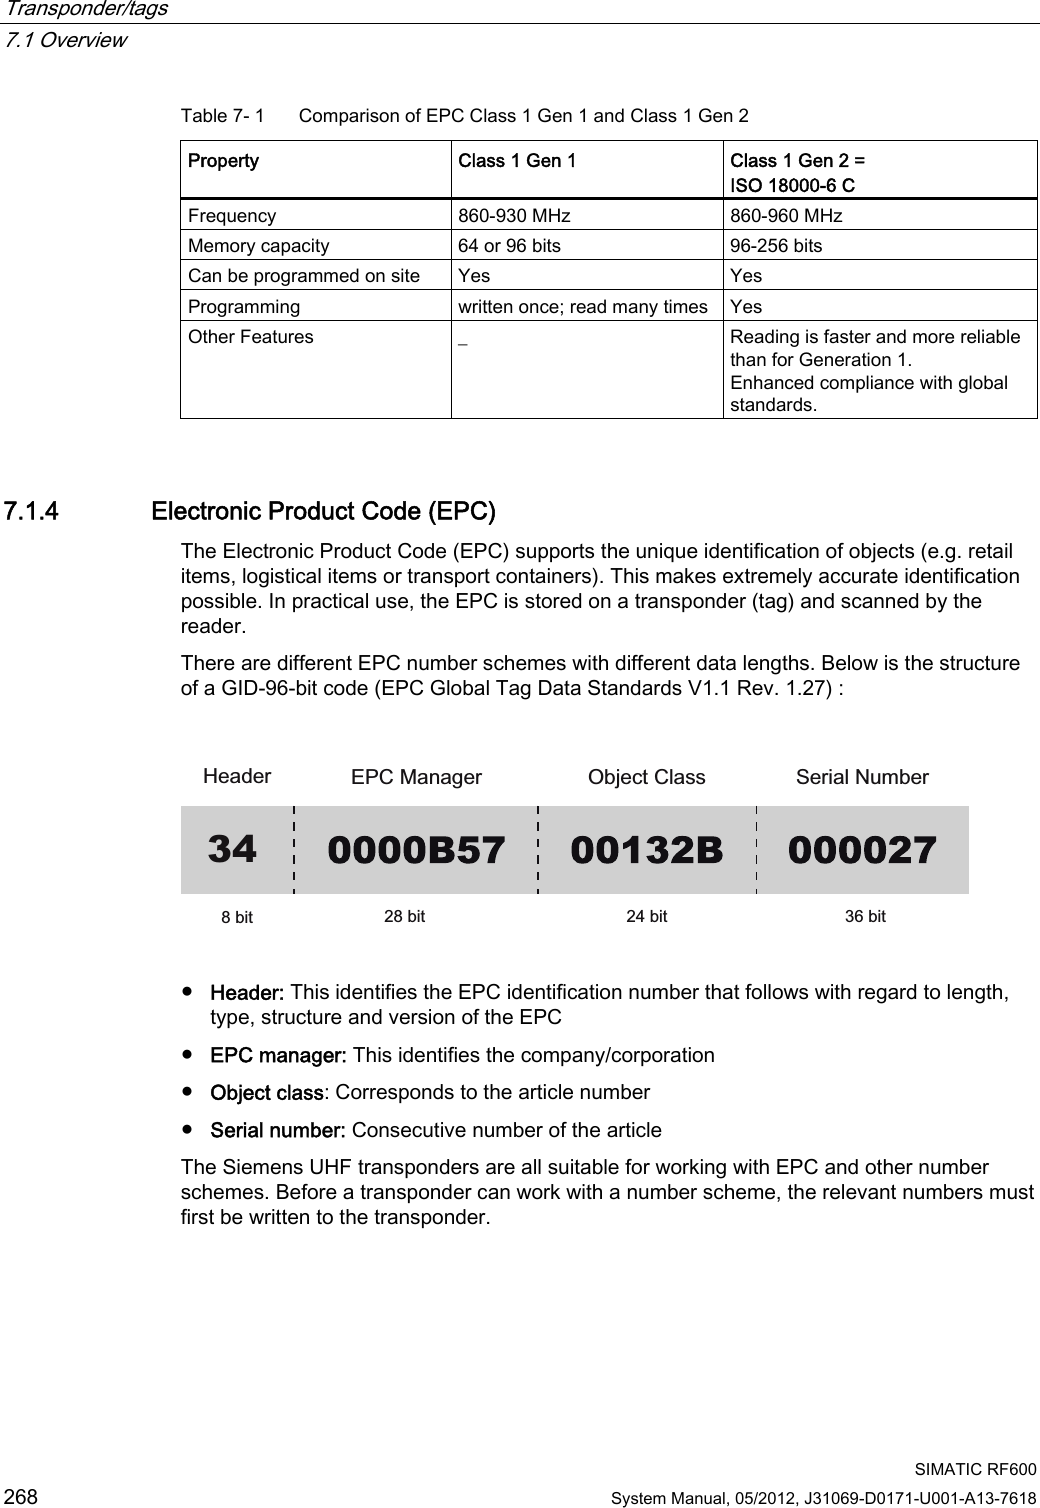 Transponder/tags   7.1 Overview  SIMATIC RF600 268 System Manual, 05/2012, J31069-D0171-U001-A13-7618 Table 7- 1  Comparison of EPC Class 1 Gen 1 and Class 1 Gen 2 Property  Class 1 Gen 1  Class 1 Gen 2 = ISO 18000-6 C Frequency  860-930 MHz  860-960 MHz Memory capacity  64 or 96 bits  96-256 bits Can be programmed on site  Yes  Yes Programming  written once; read many times  Yes Other Features  _  Reading is faster and more reliable than for Generation 1. Enhanced compliance with global standards. 7.1.4 Electronic Product Code (EPC) The Electronic Product Code (EPC) supports the unique identification of objects (e.g. retail items, logistical items or transport containers). This makes extremely accurate identification possible. In practical use, the EPC is stored on a transponder (tag) and scanned by the reader. There are different EPC number schemes with different data lengths. Below is the structure of a GID-96-bit code (EPC Global Tag Data Standards V1.1 Rev. 1.27) :  +HDGHU (3&amp;0DQDJHU 2EMHFW&amp;ODVV 6HULDO1XPEHUELW ELW ELW ELW34  ●  Header: This identifies the EPC identification number that follows with regard to length, type, structure and version of the EPC ●  EPC manager: This identifies the company/corporation ●  Object class: Corresponds to the article number ●  Serial number: Consecutive number of the article The Siemens UHF transponders are all suitable for working with EPC and other number schemes. Before a transponder can work with a number scheme, the relevant numbers must first be written to the transponder. 